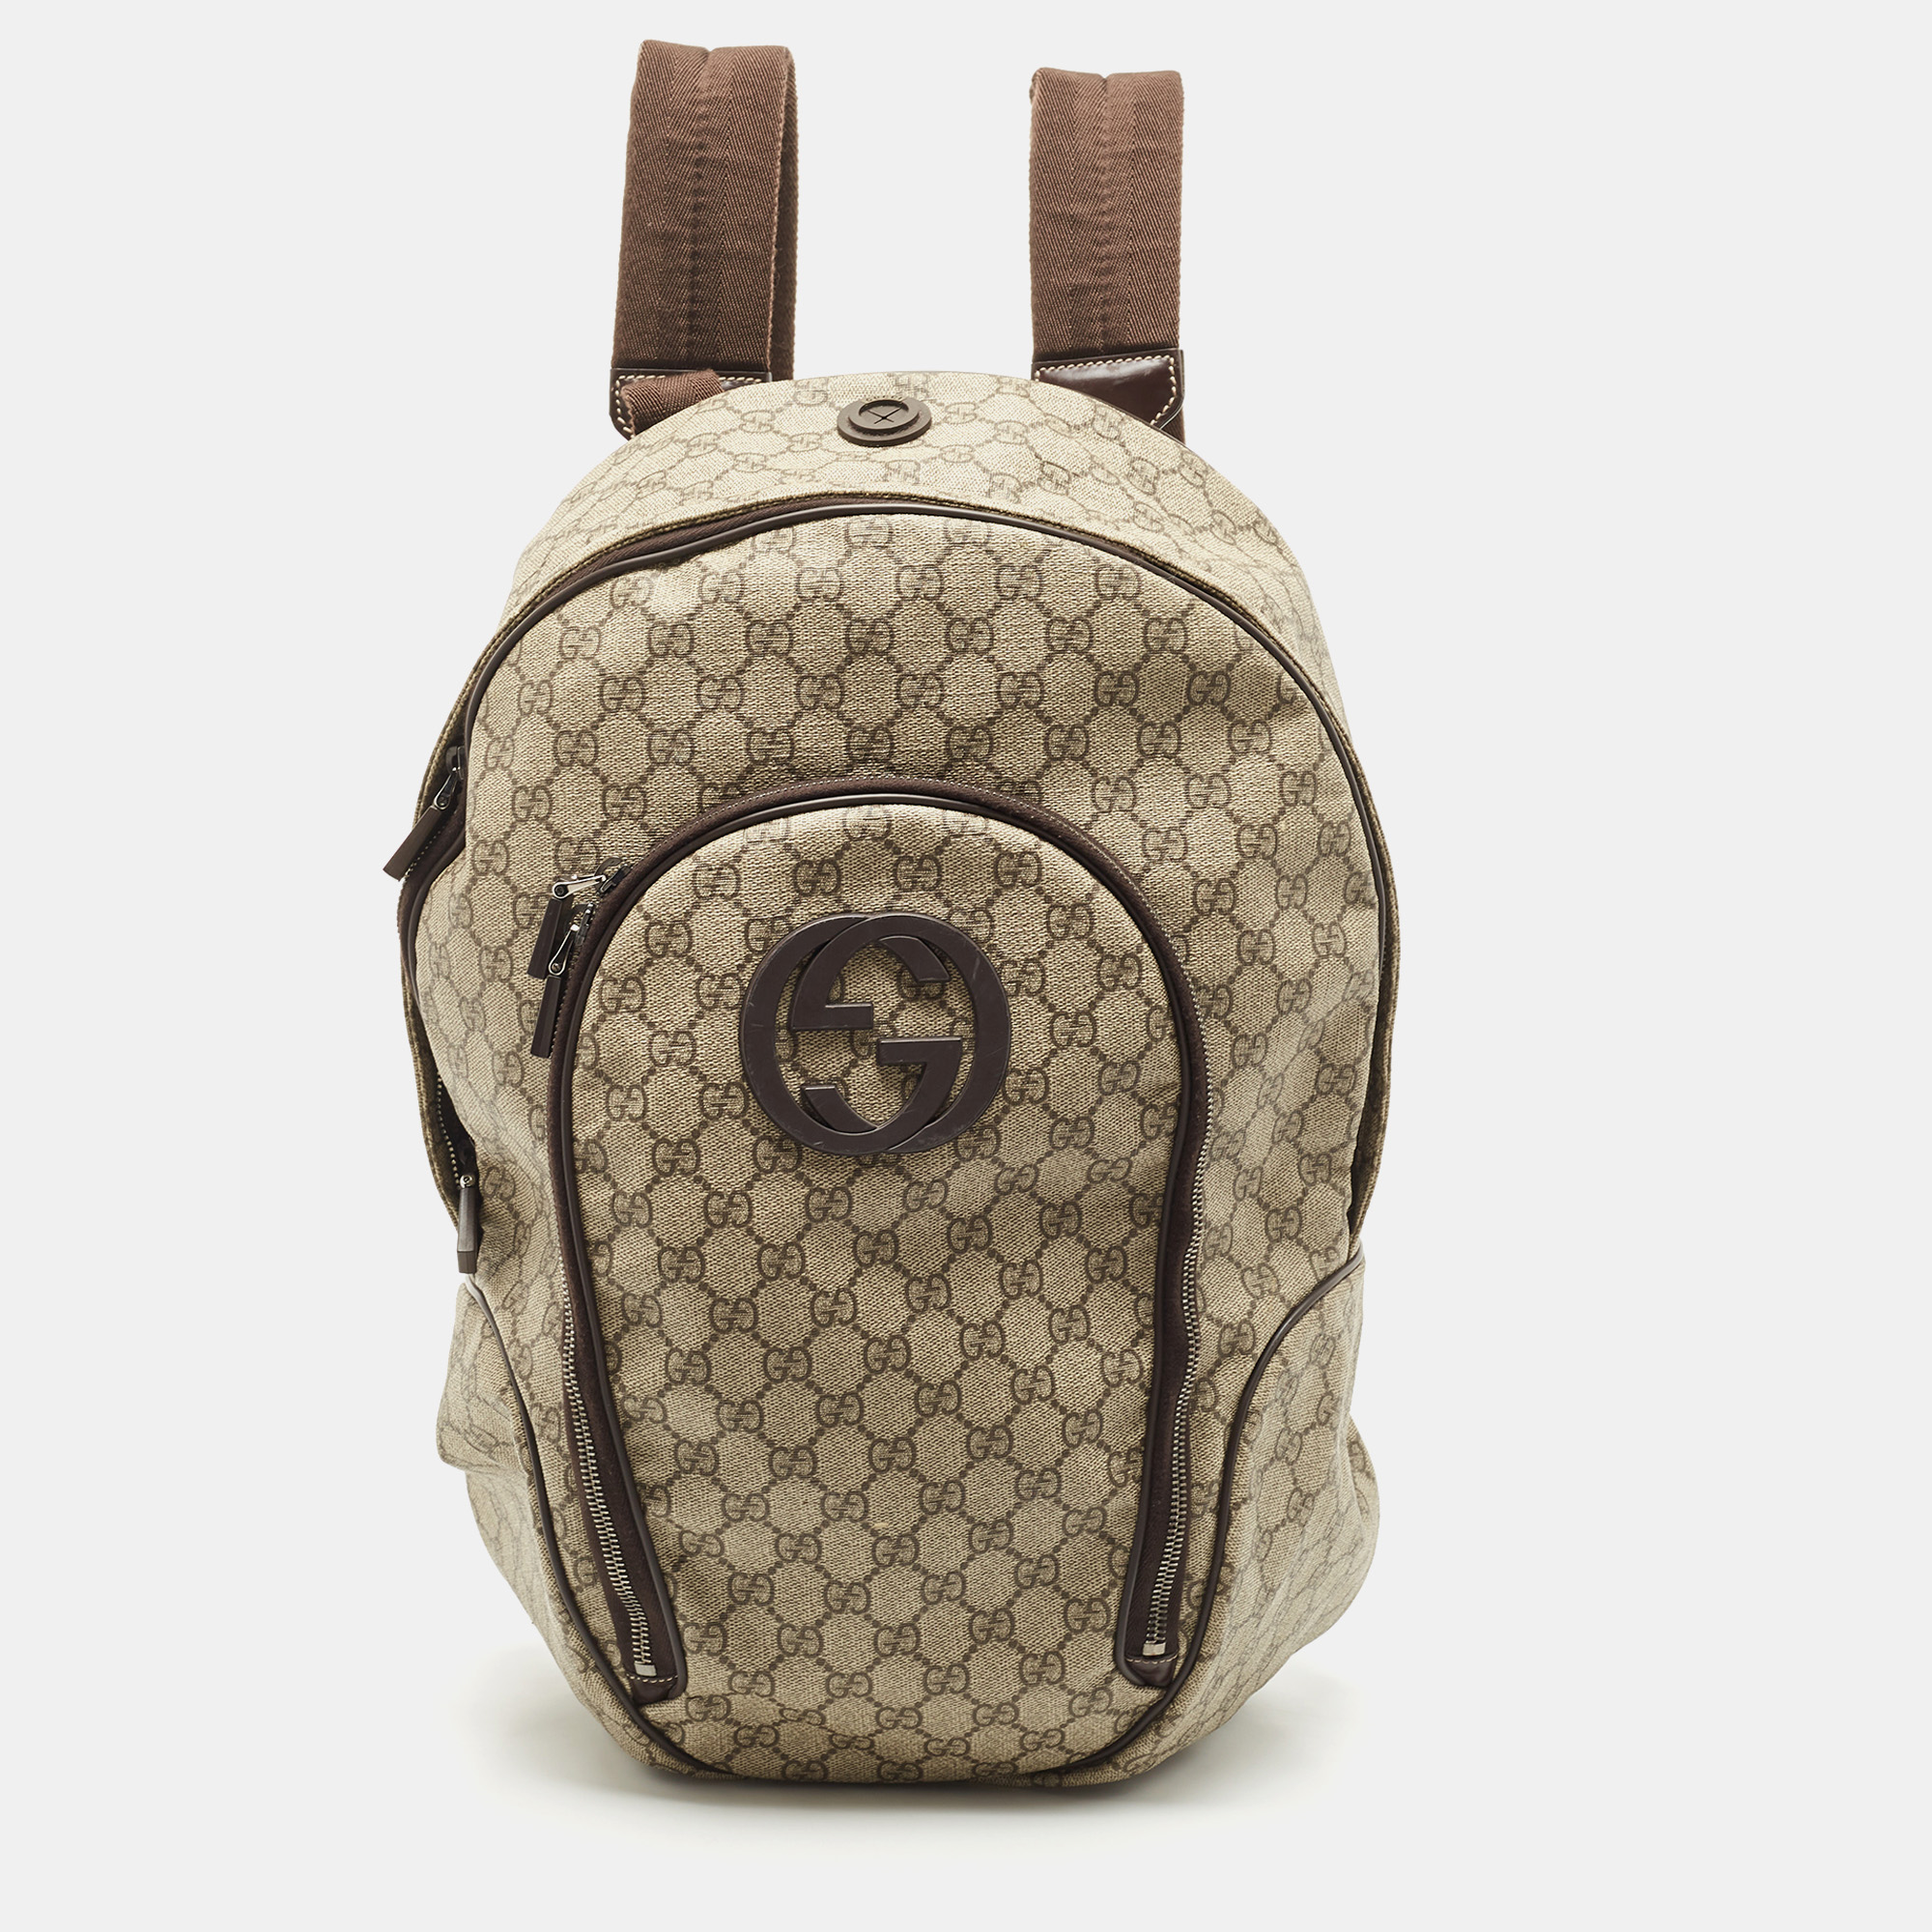 Pre-owned Gucci Beige/brown Gg Supreme Canvas Interlocking G Backpack